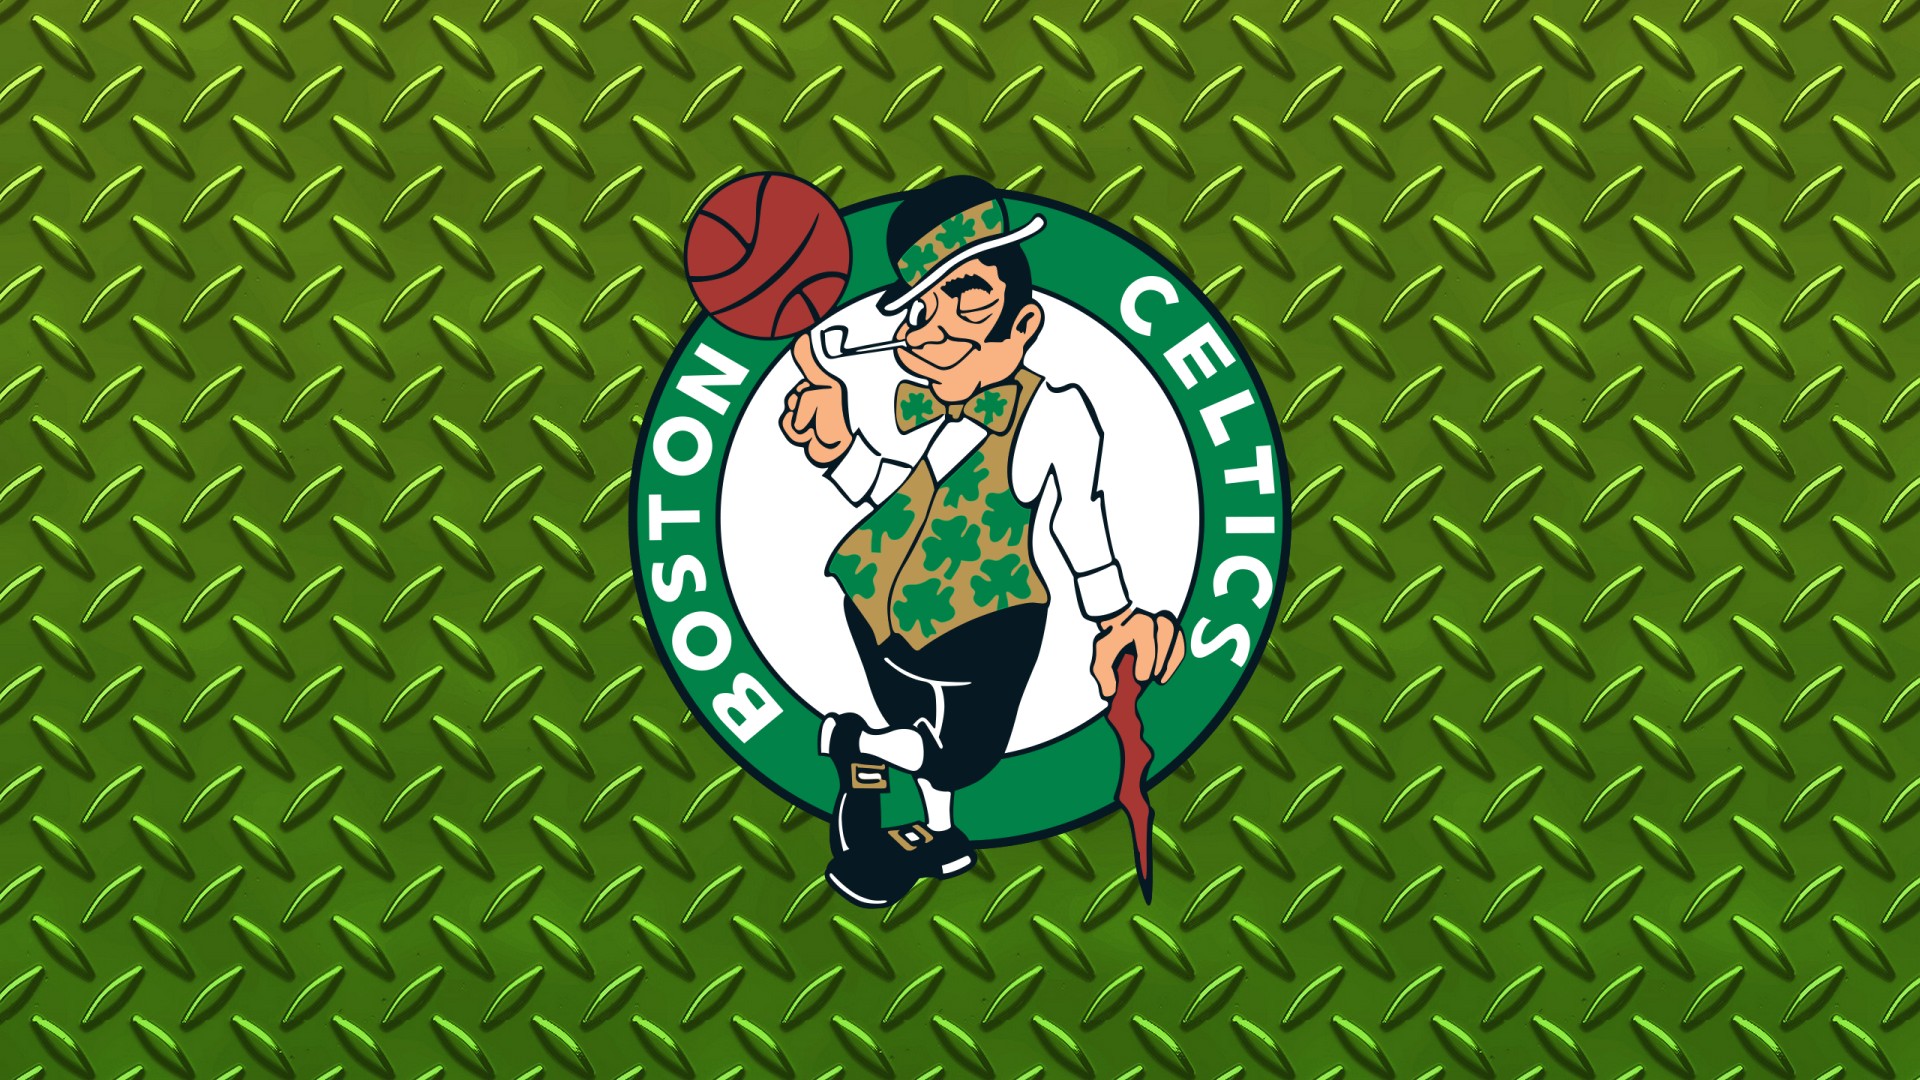 HD Boston Celtics Wallpapers with image dimensions 1920x1080 pixel. You can make this wallpaper for your Desktop Computer Backgrounds, Windows or Mac Screensavers, iPhone Lock screen, Tablet or Android and another Mobile Phone device